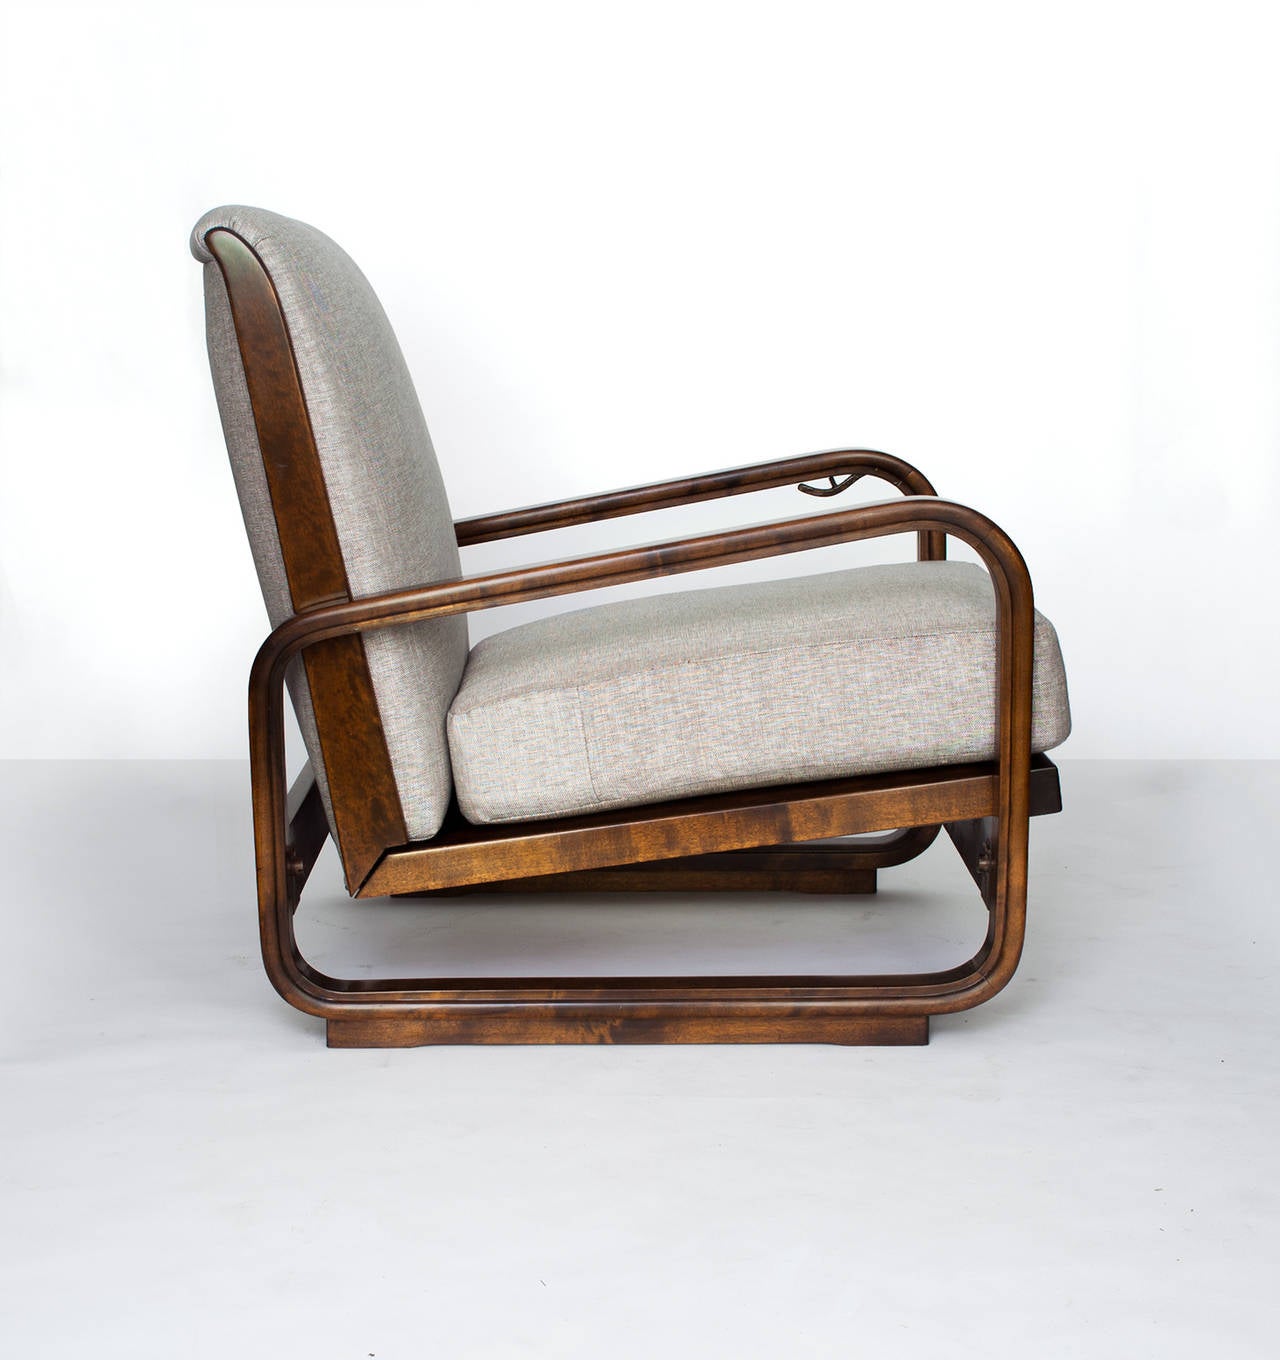 Carved Pair of Swedish Art Deco Modernist Lounge Chairs by Erik Chambert